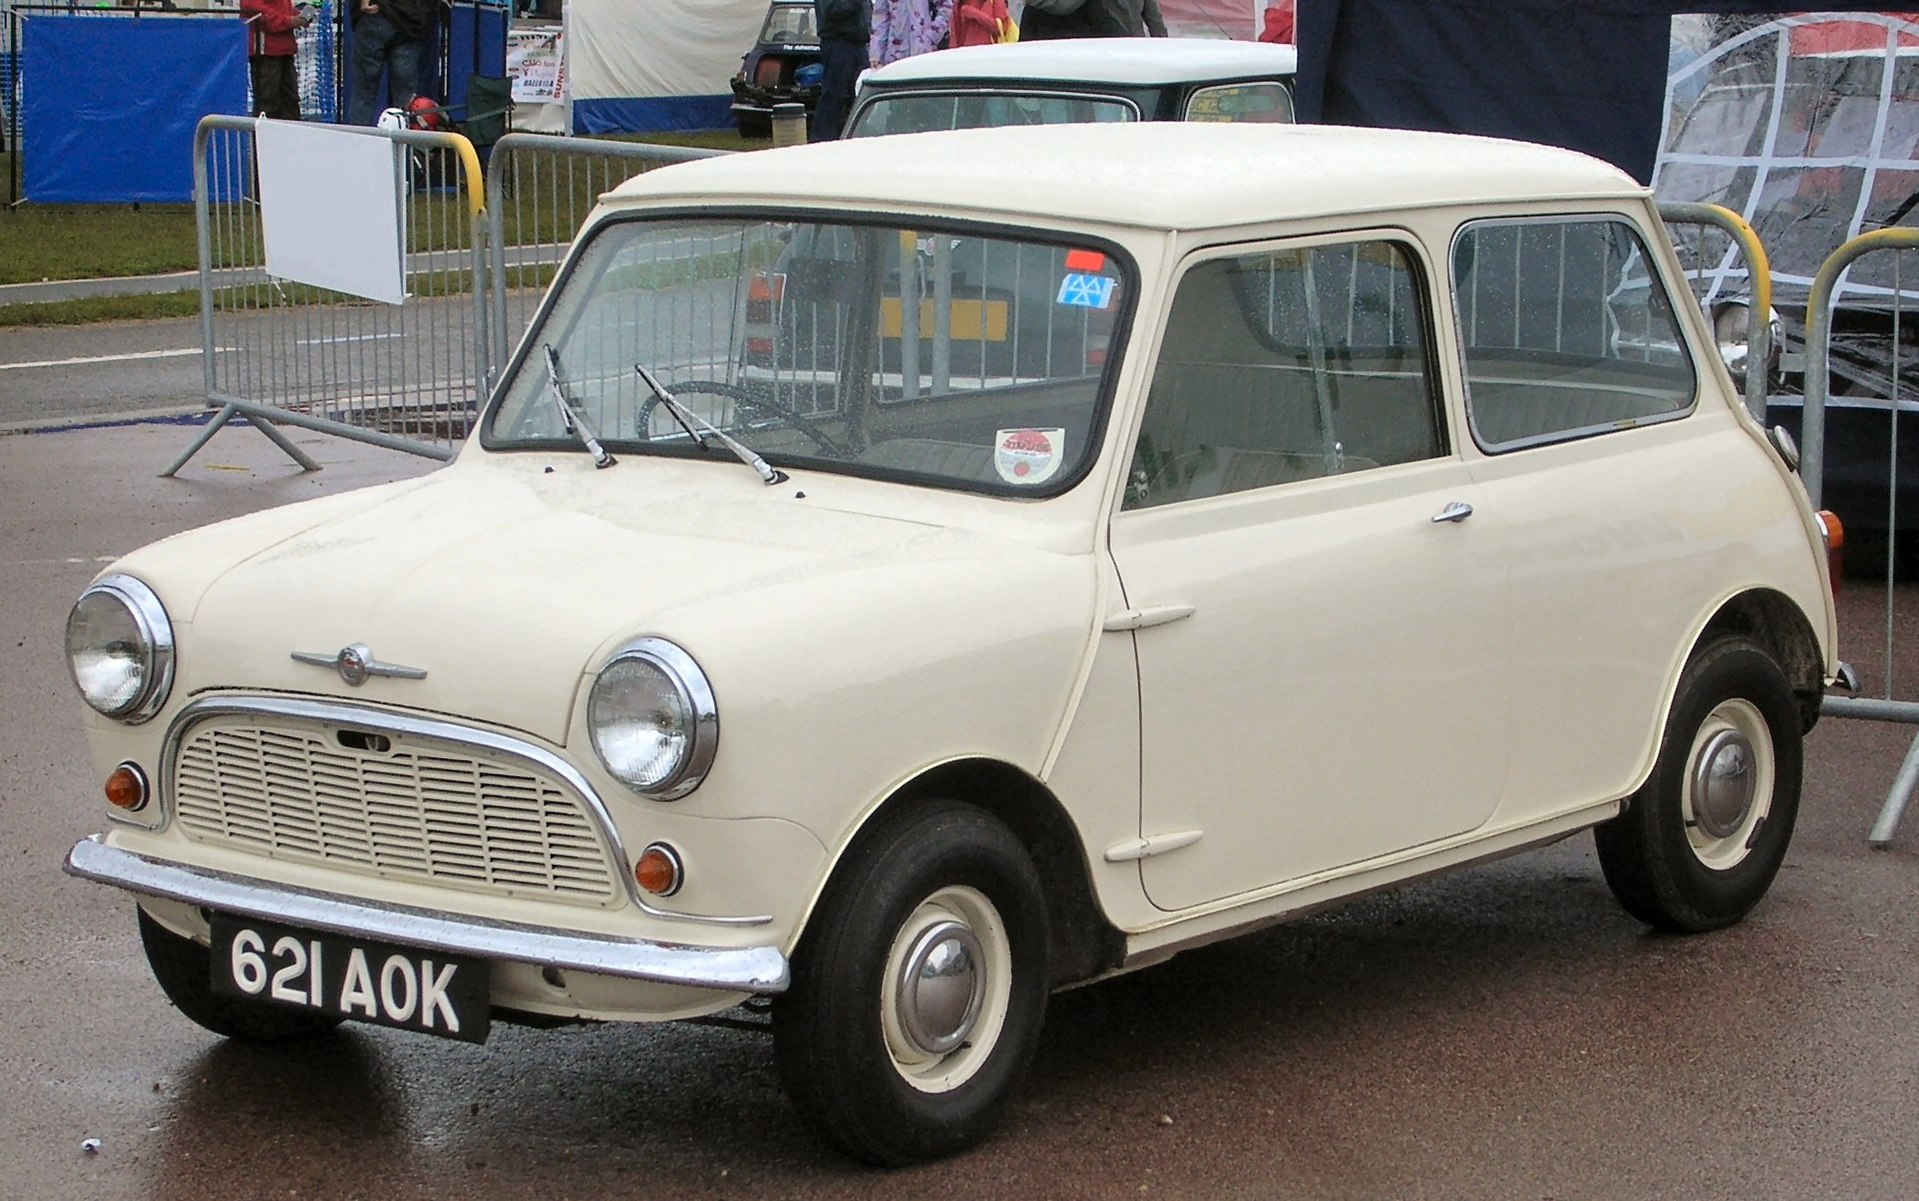 From Mini to Maxi: six decades of Mini tyres